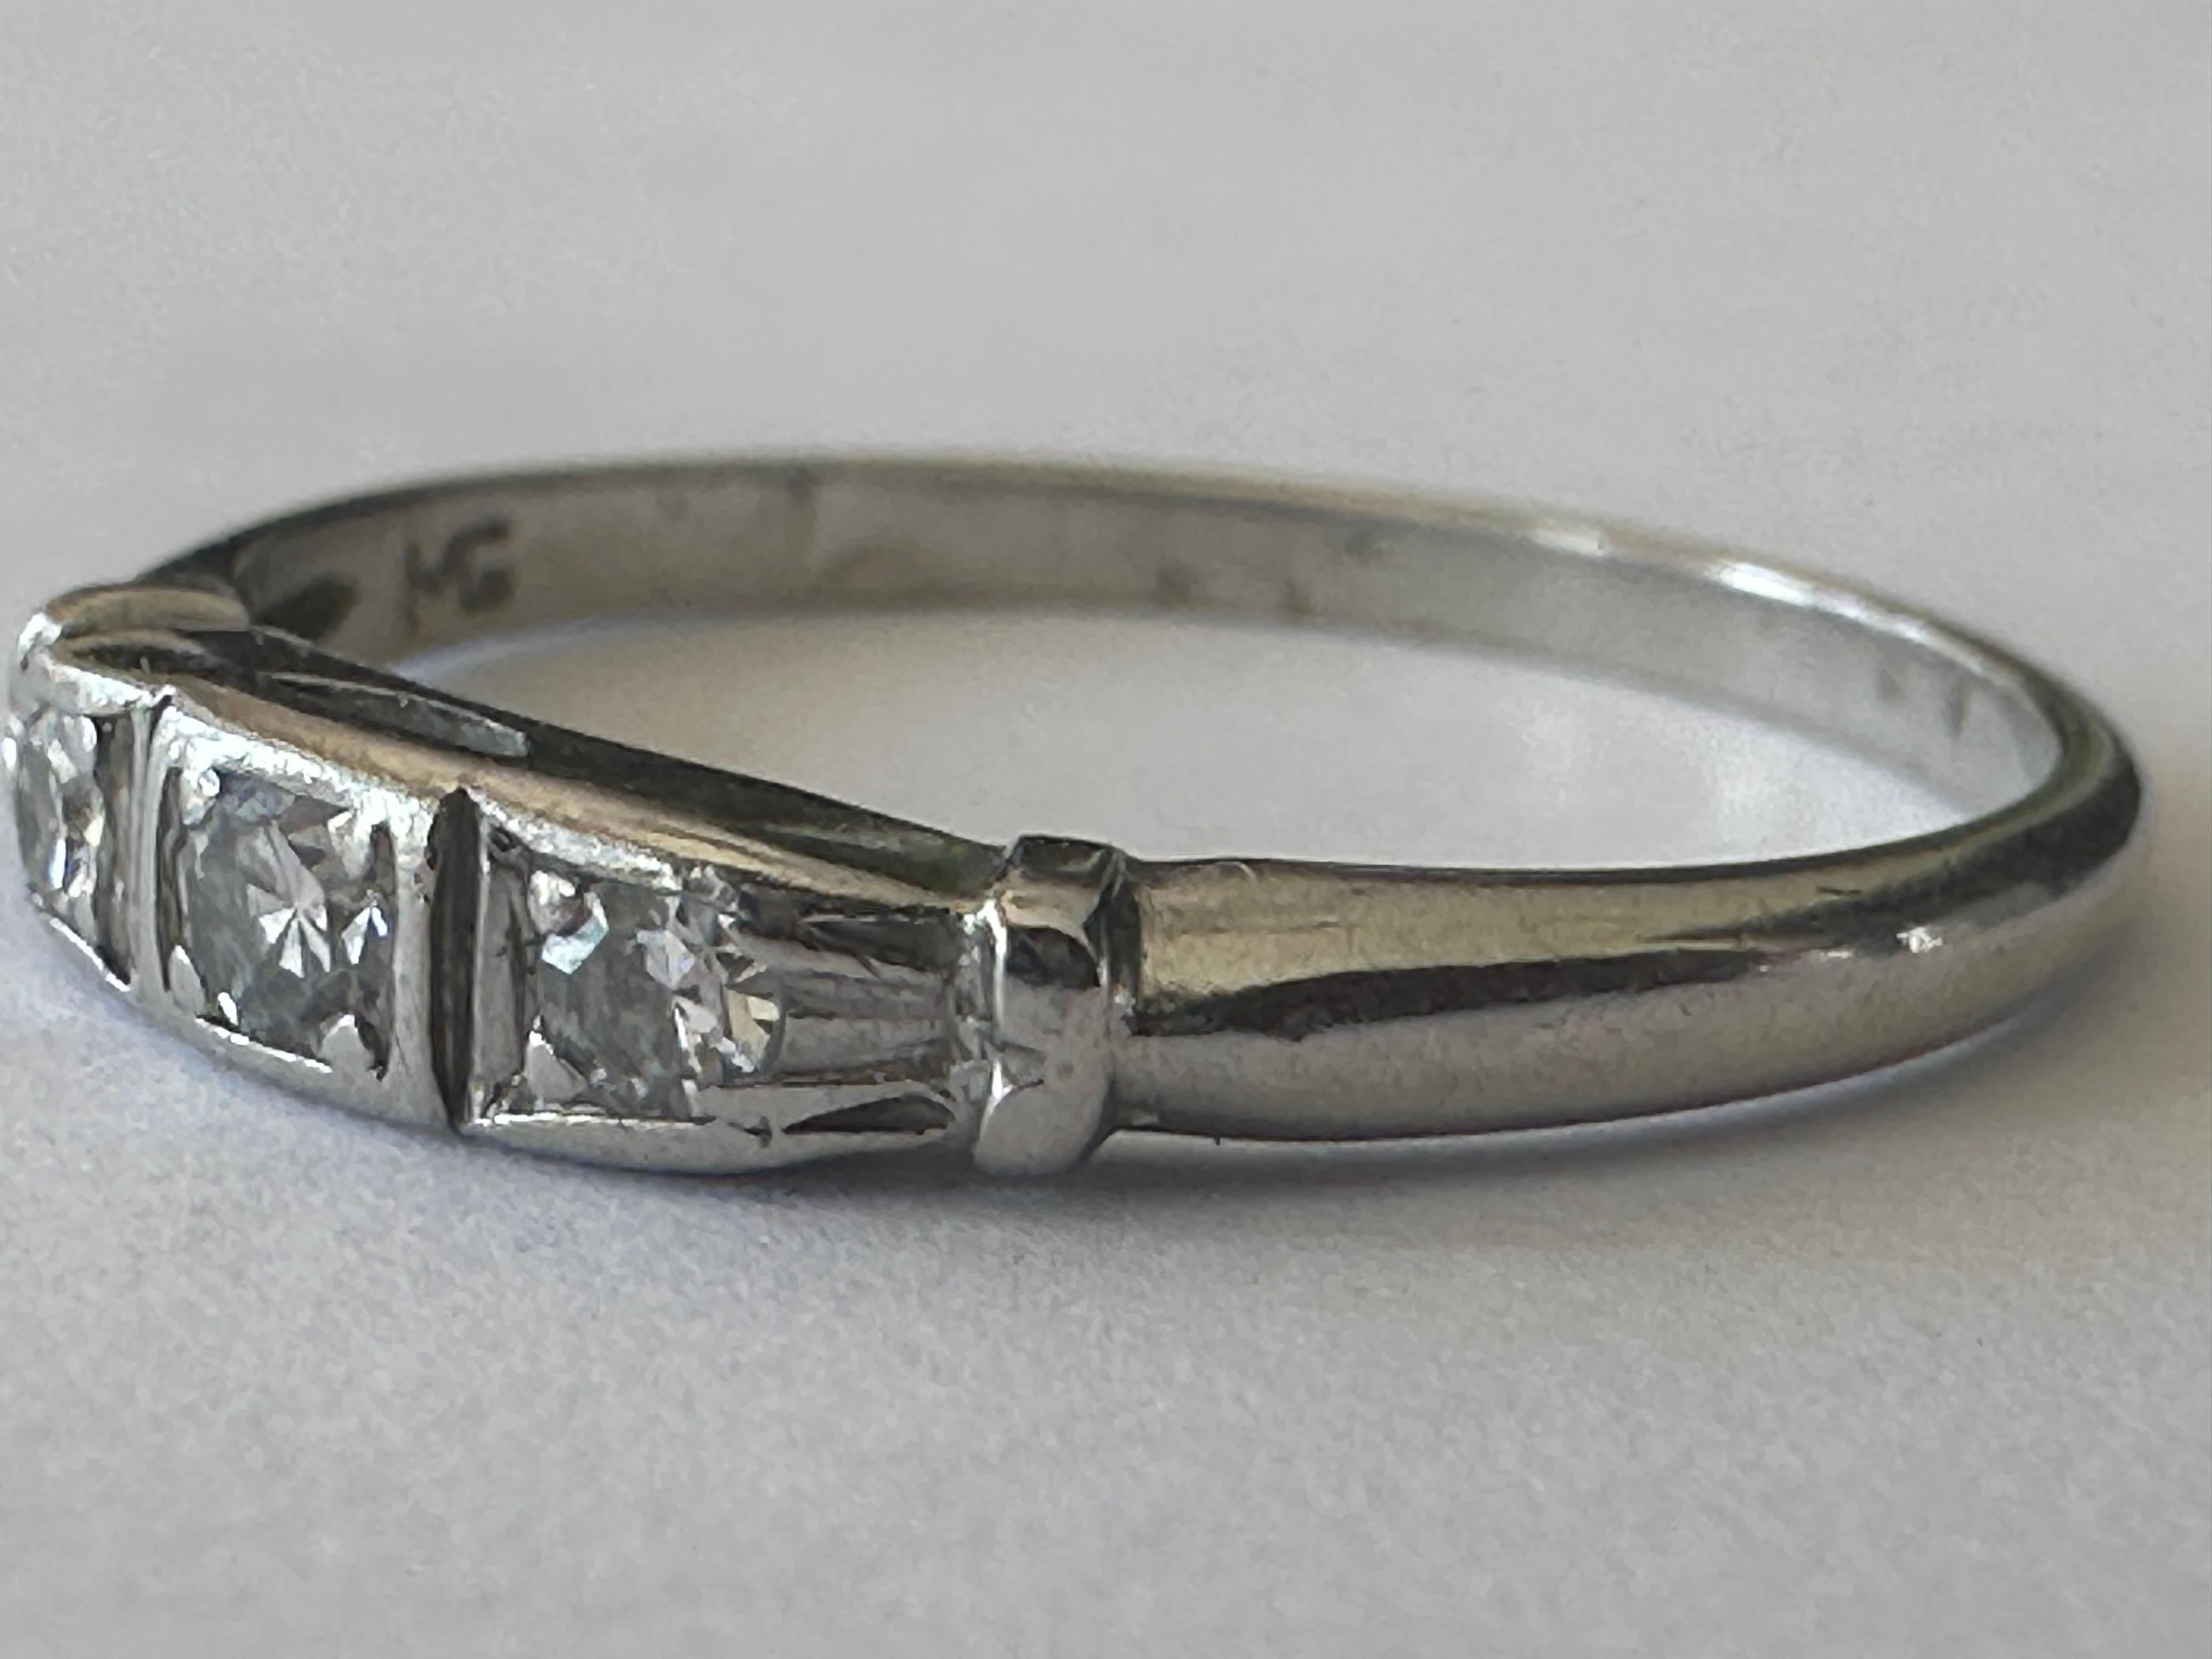 Three single-cut diamonds totaling approximately 0.08 carats F color VS clarity shimmer across the top of this classic Art Deco band crafted in platinum. The width of the top of the band measures 3mm. 